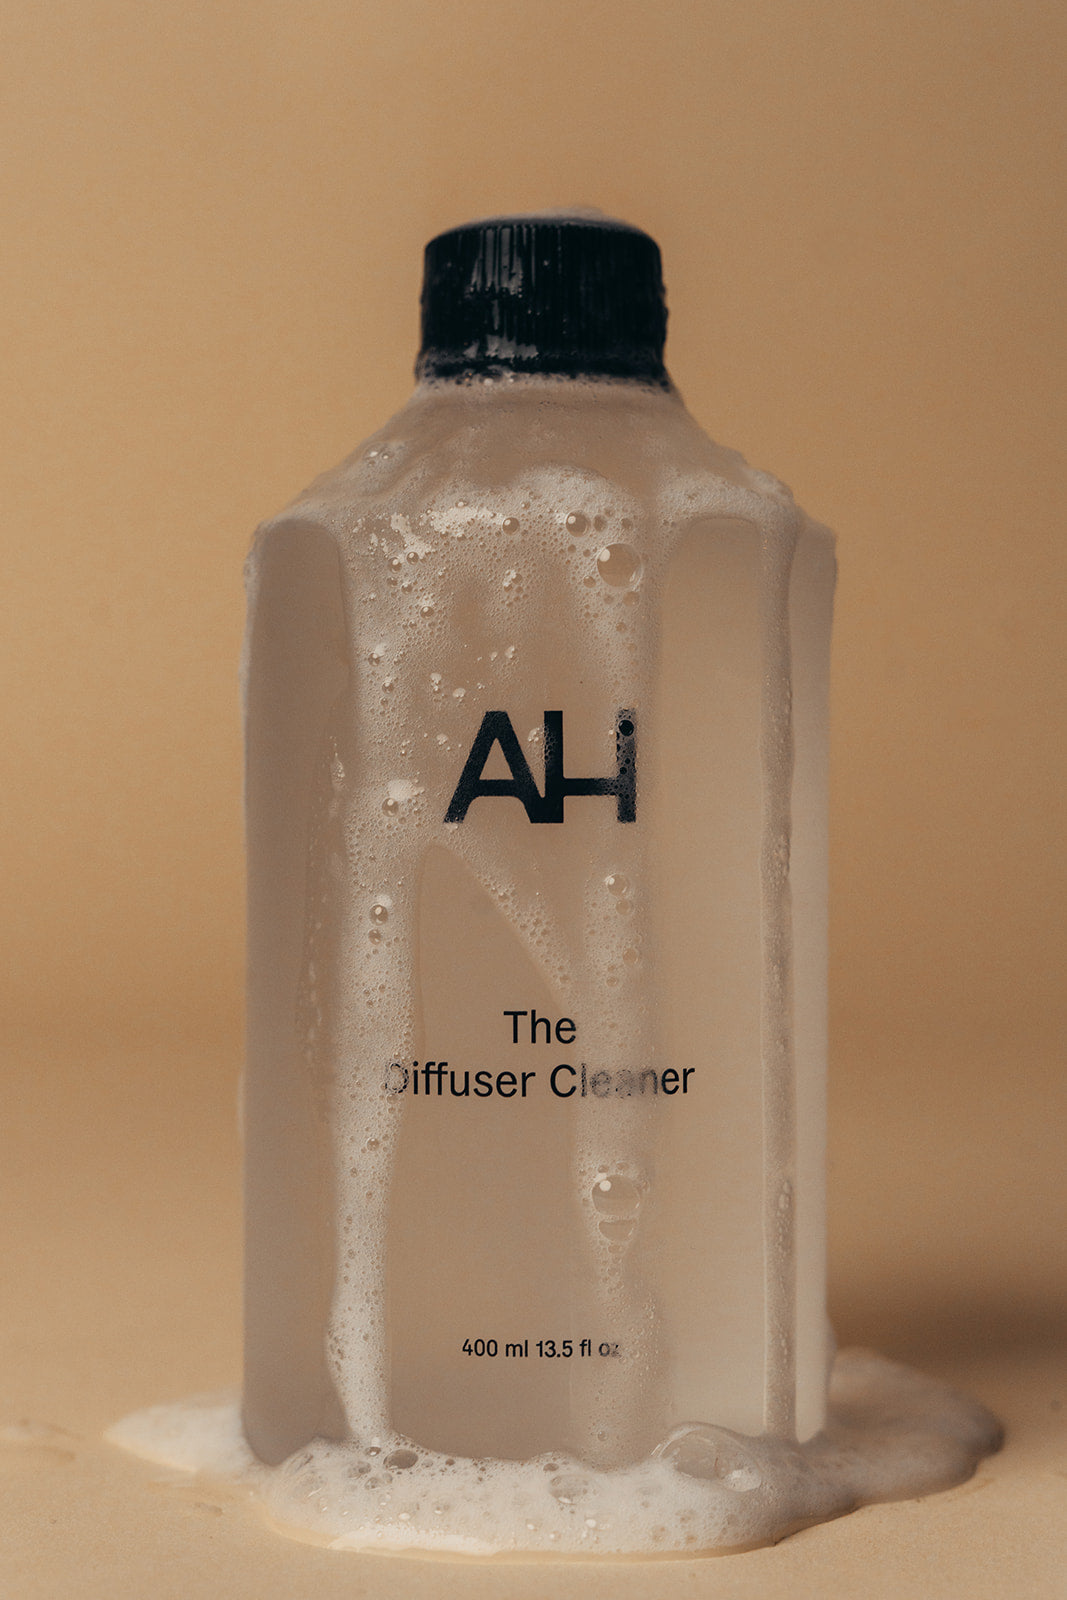 The Diffuser Cleaner